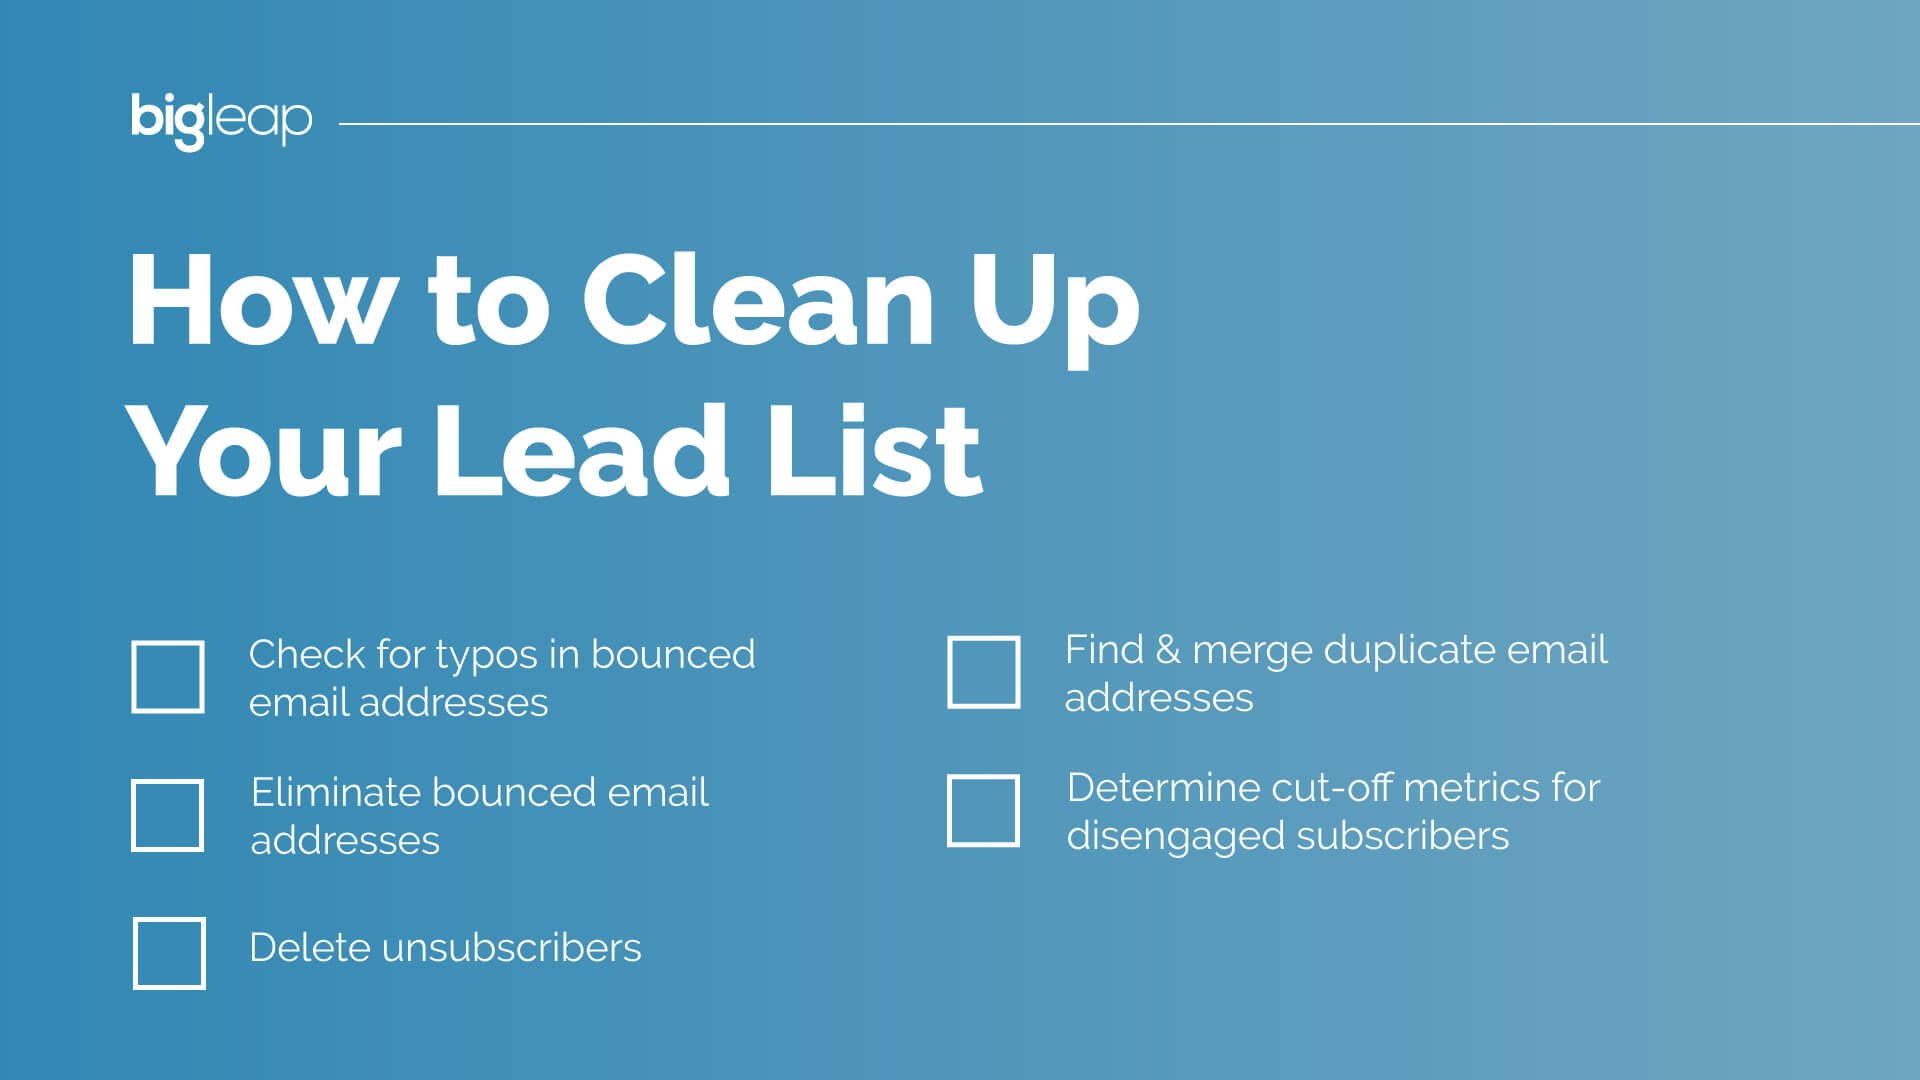 how to clean up lead list checklist